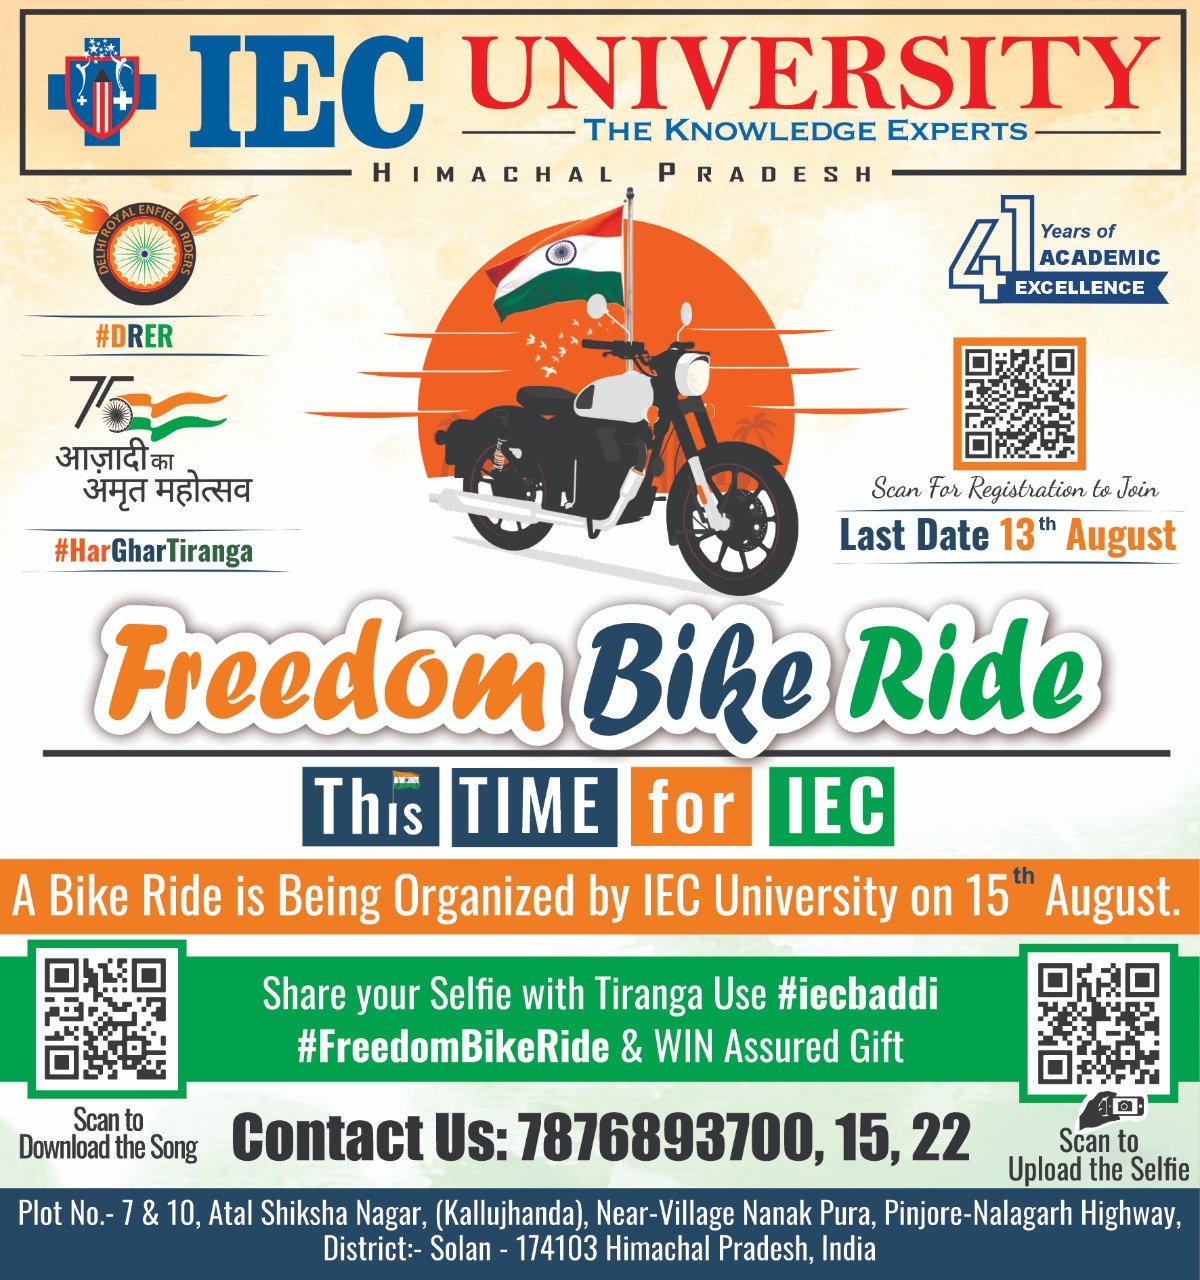 IEC University is Celebrating 3 Day's Mega Event under 'Azadi Ka Amrut Mahotsav', commemorating the Celebration of 75 years of India's Independence and the glorious history of it's people, culture and achievements.